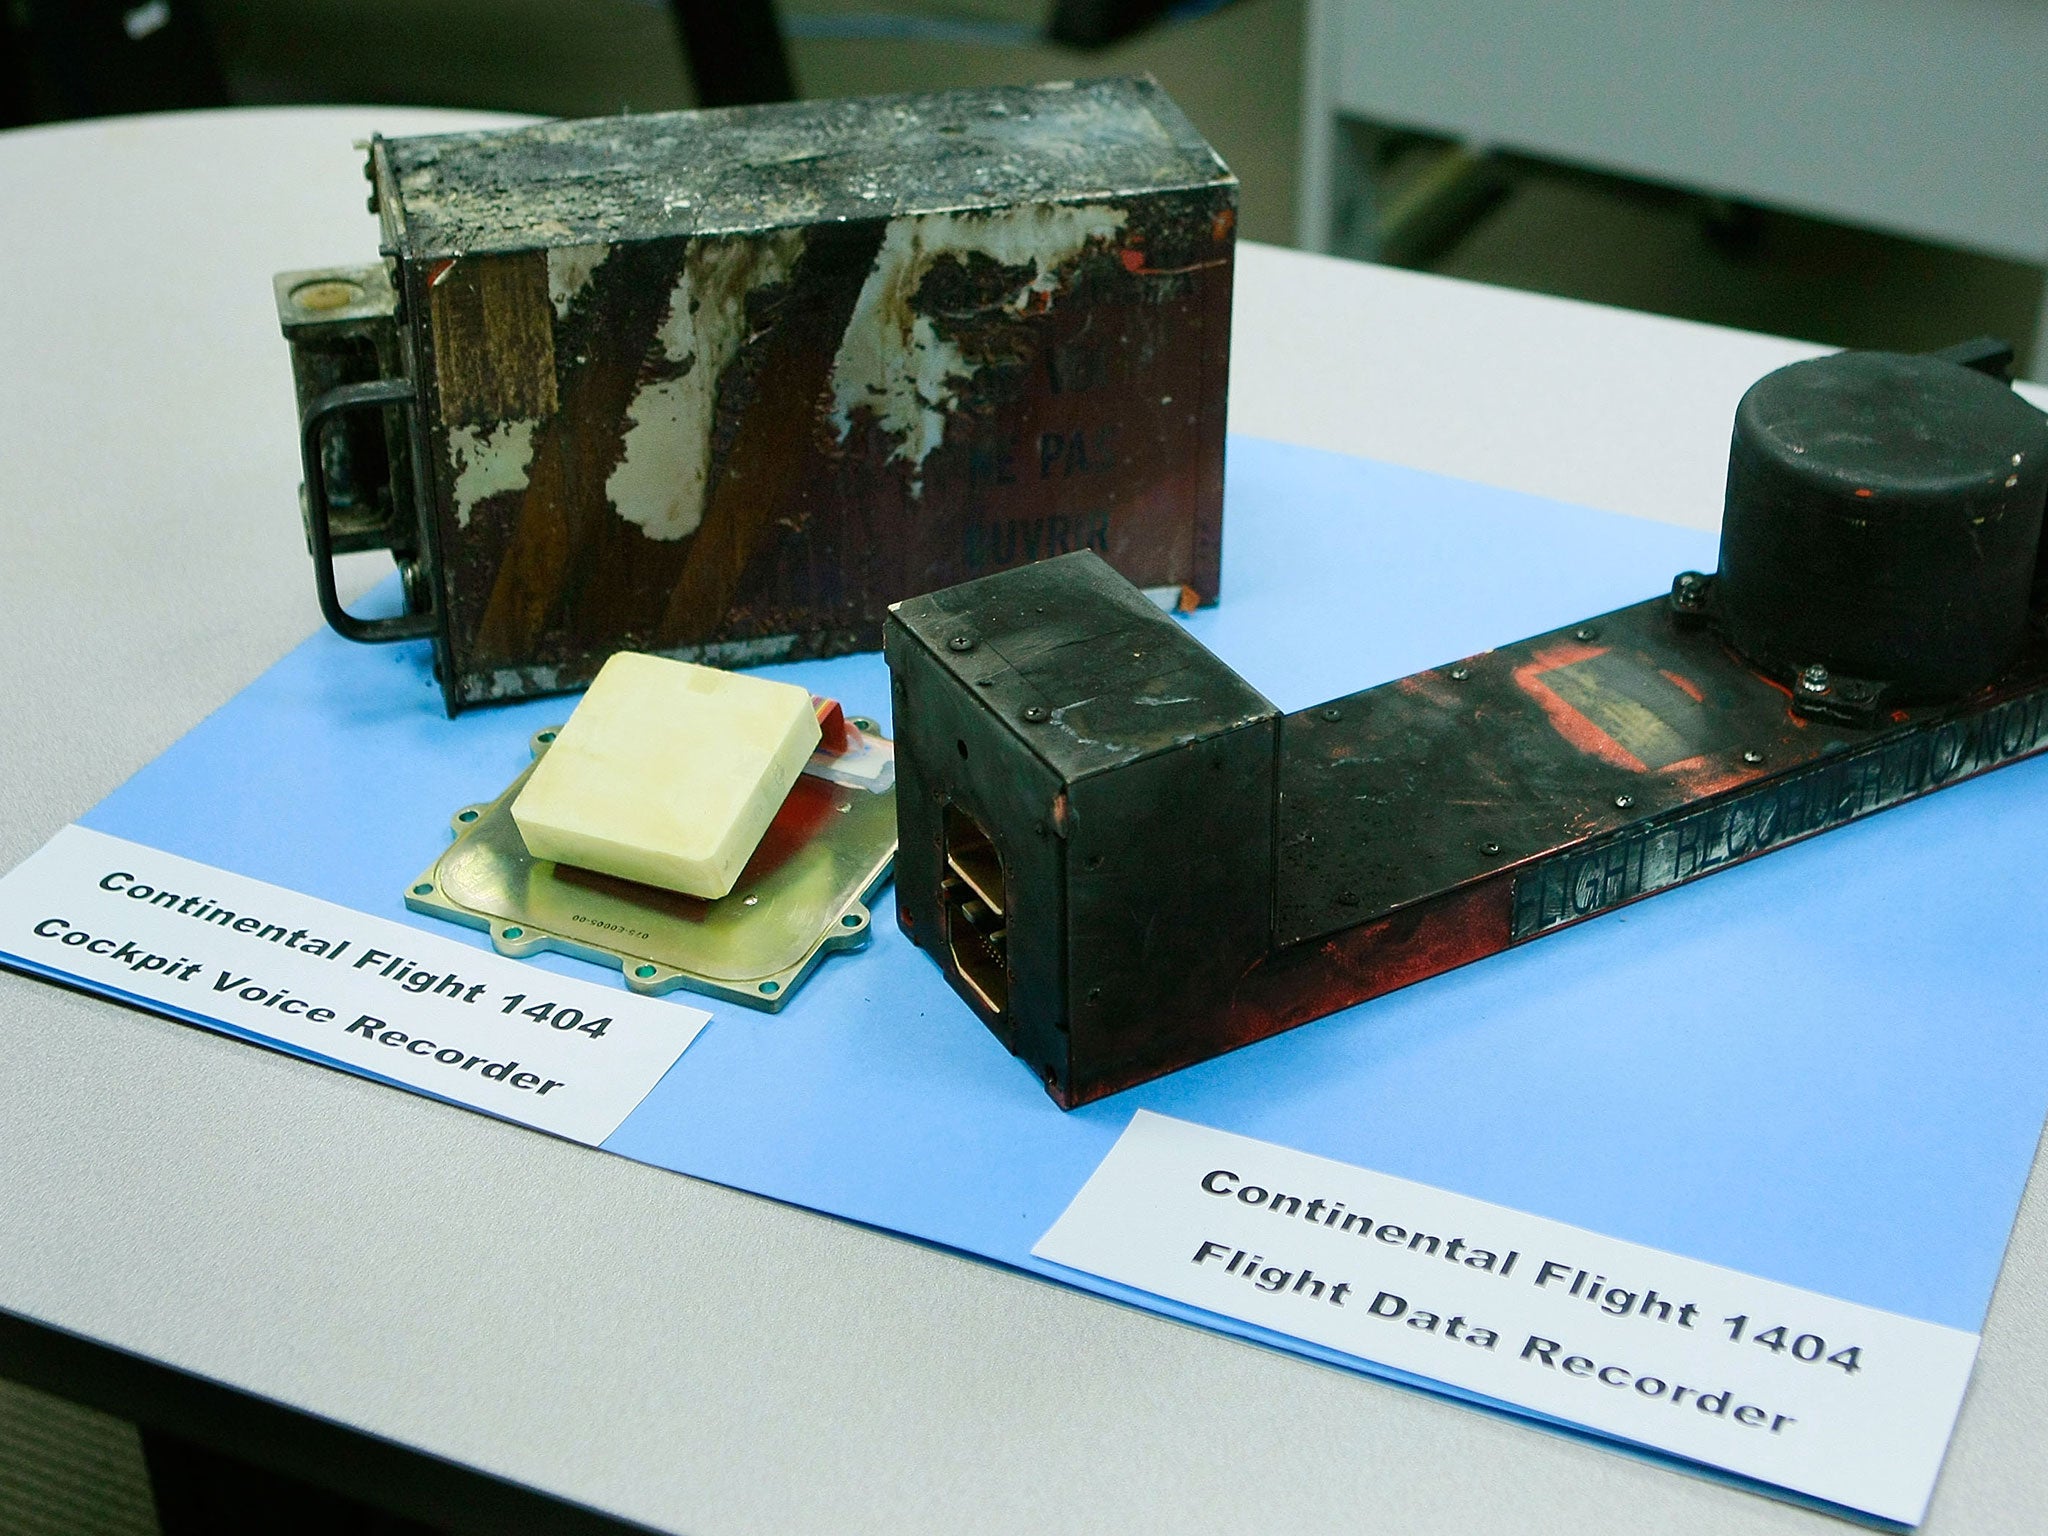 The flight recorders from Continental Airlines flight 1404 are shown at the National Transportation Safety Board headquarters December 22, 2008 in Washington, DC